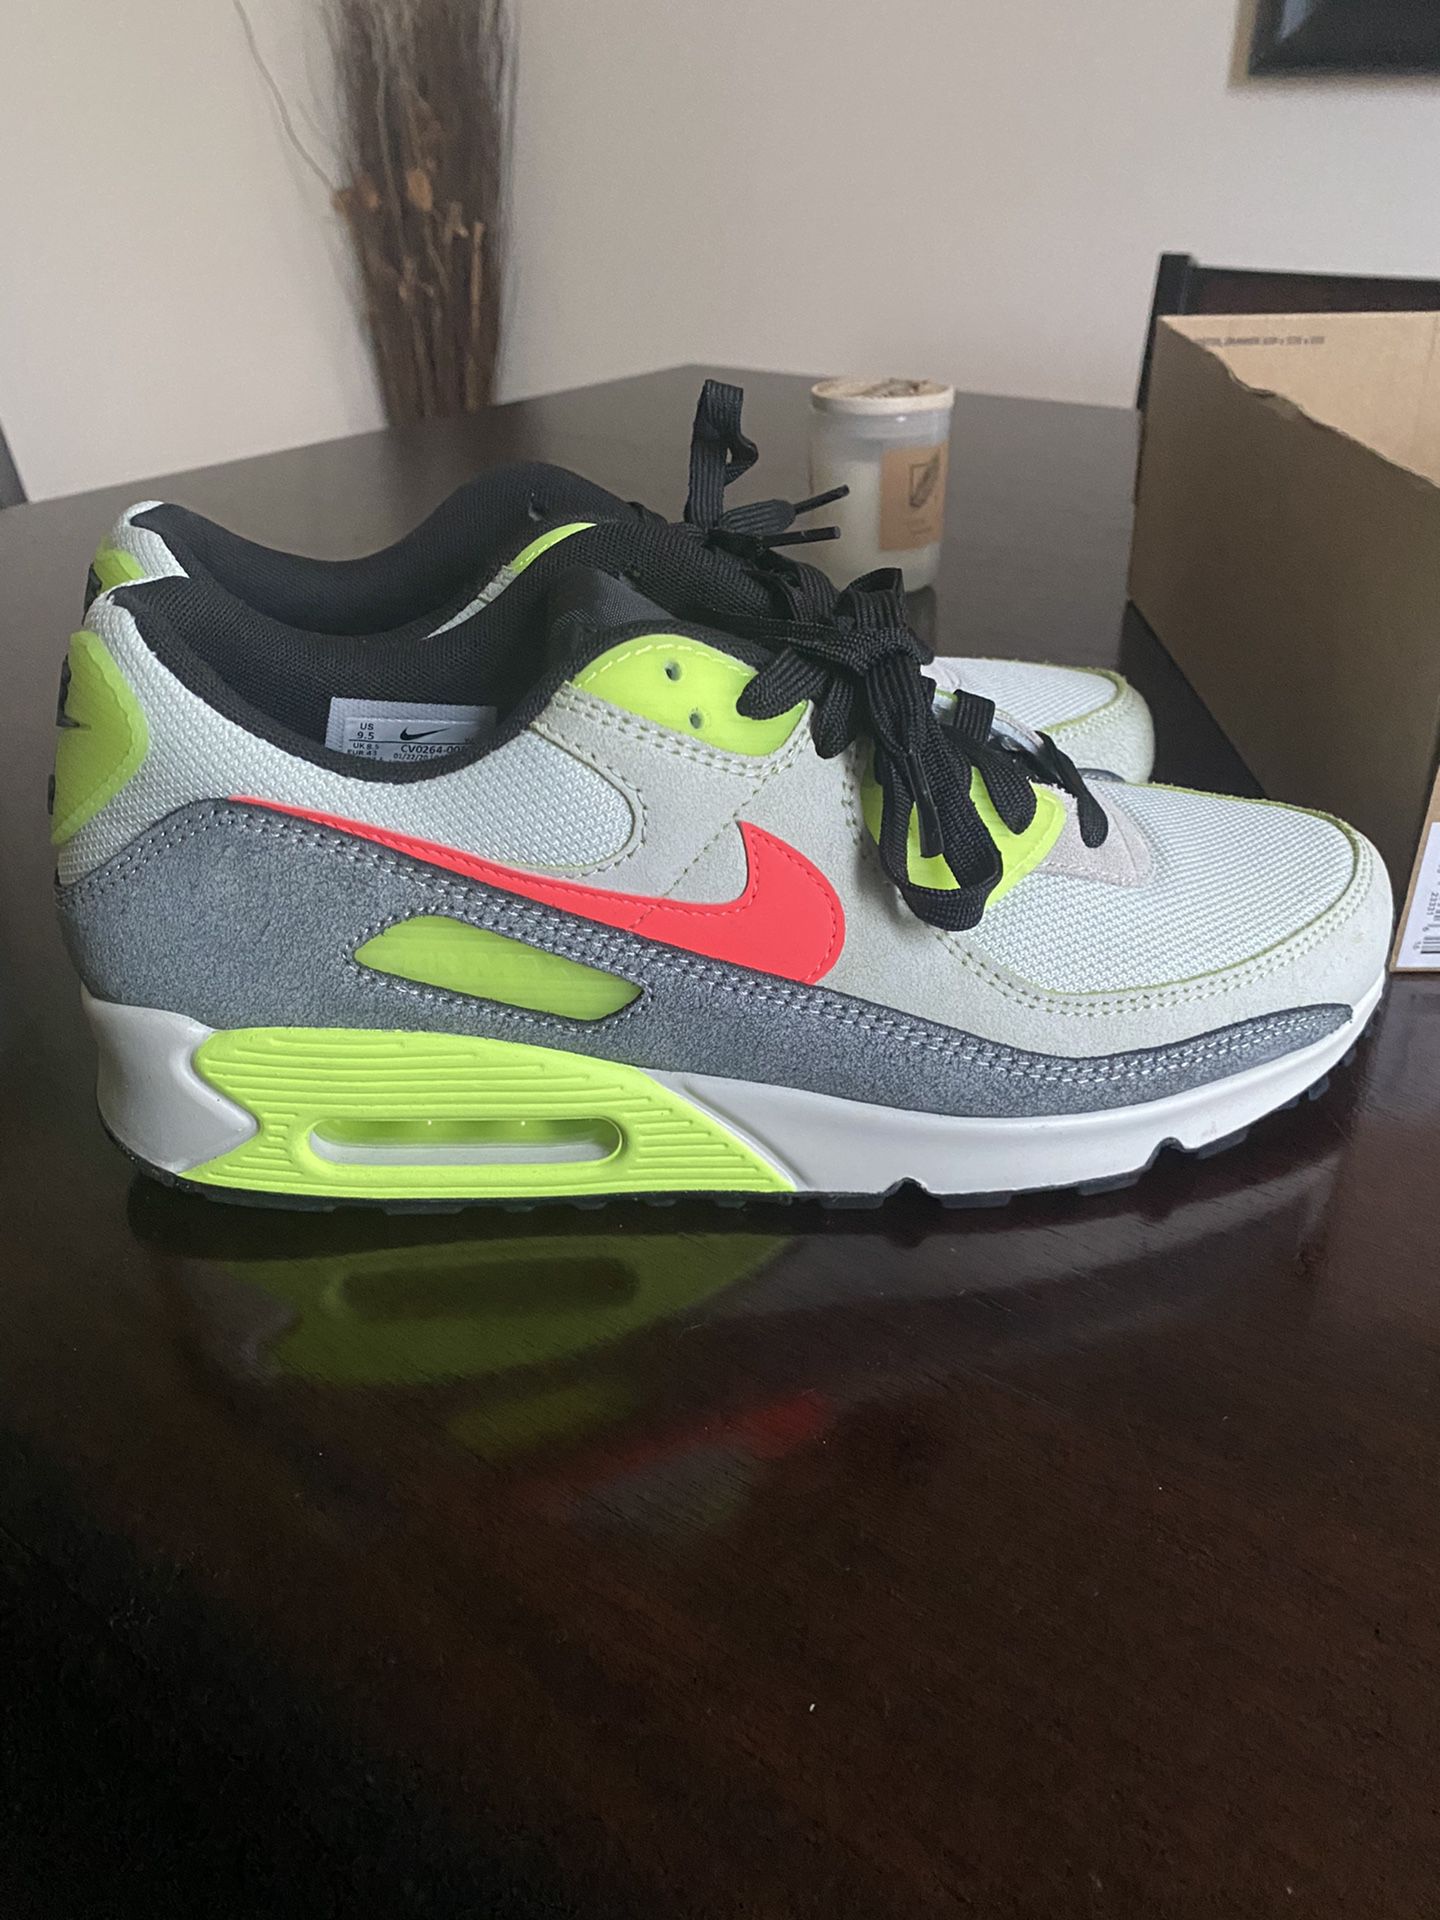 Nike AirMax 90 N7 best offer takes them